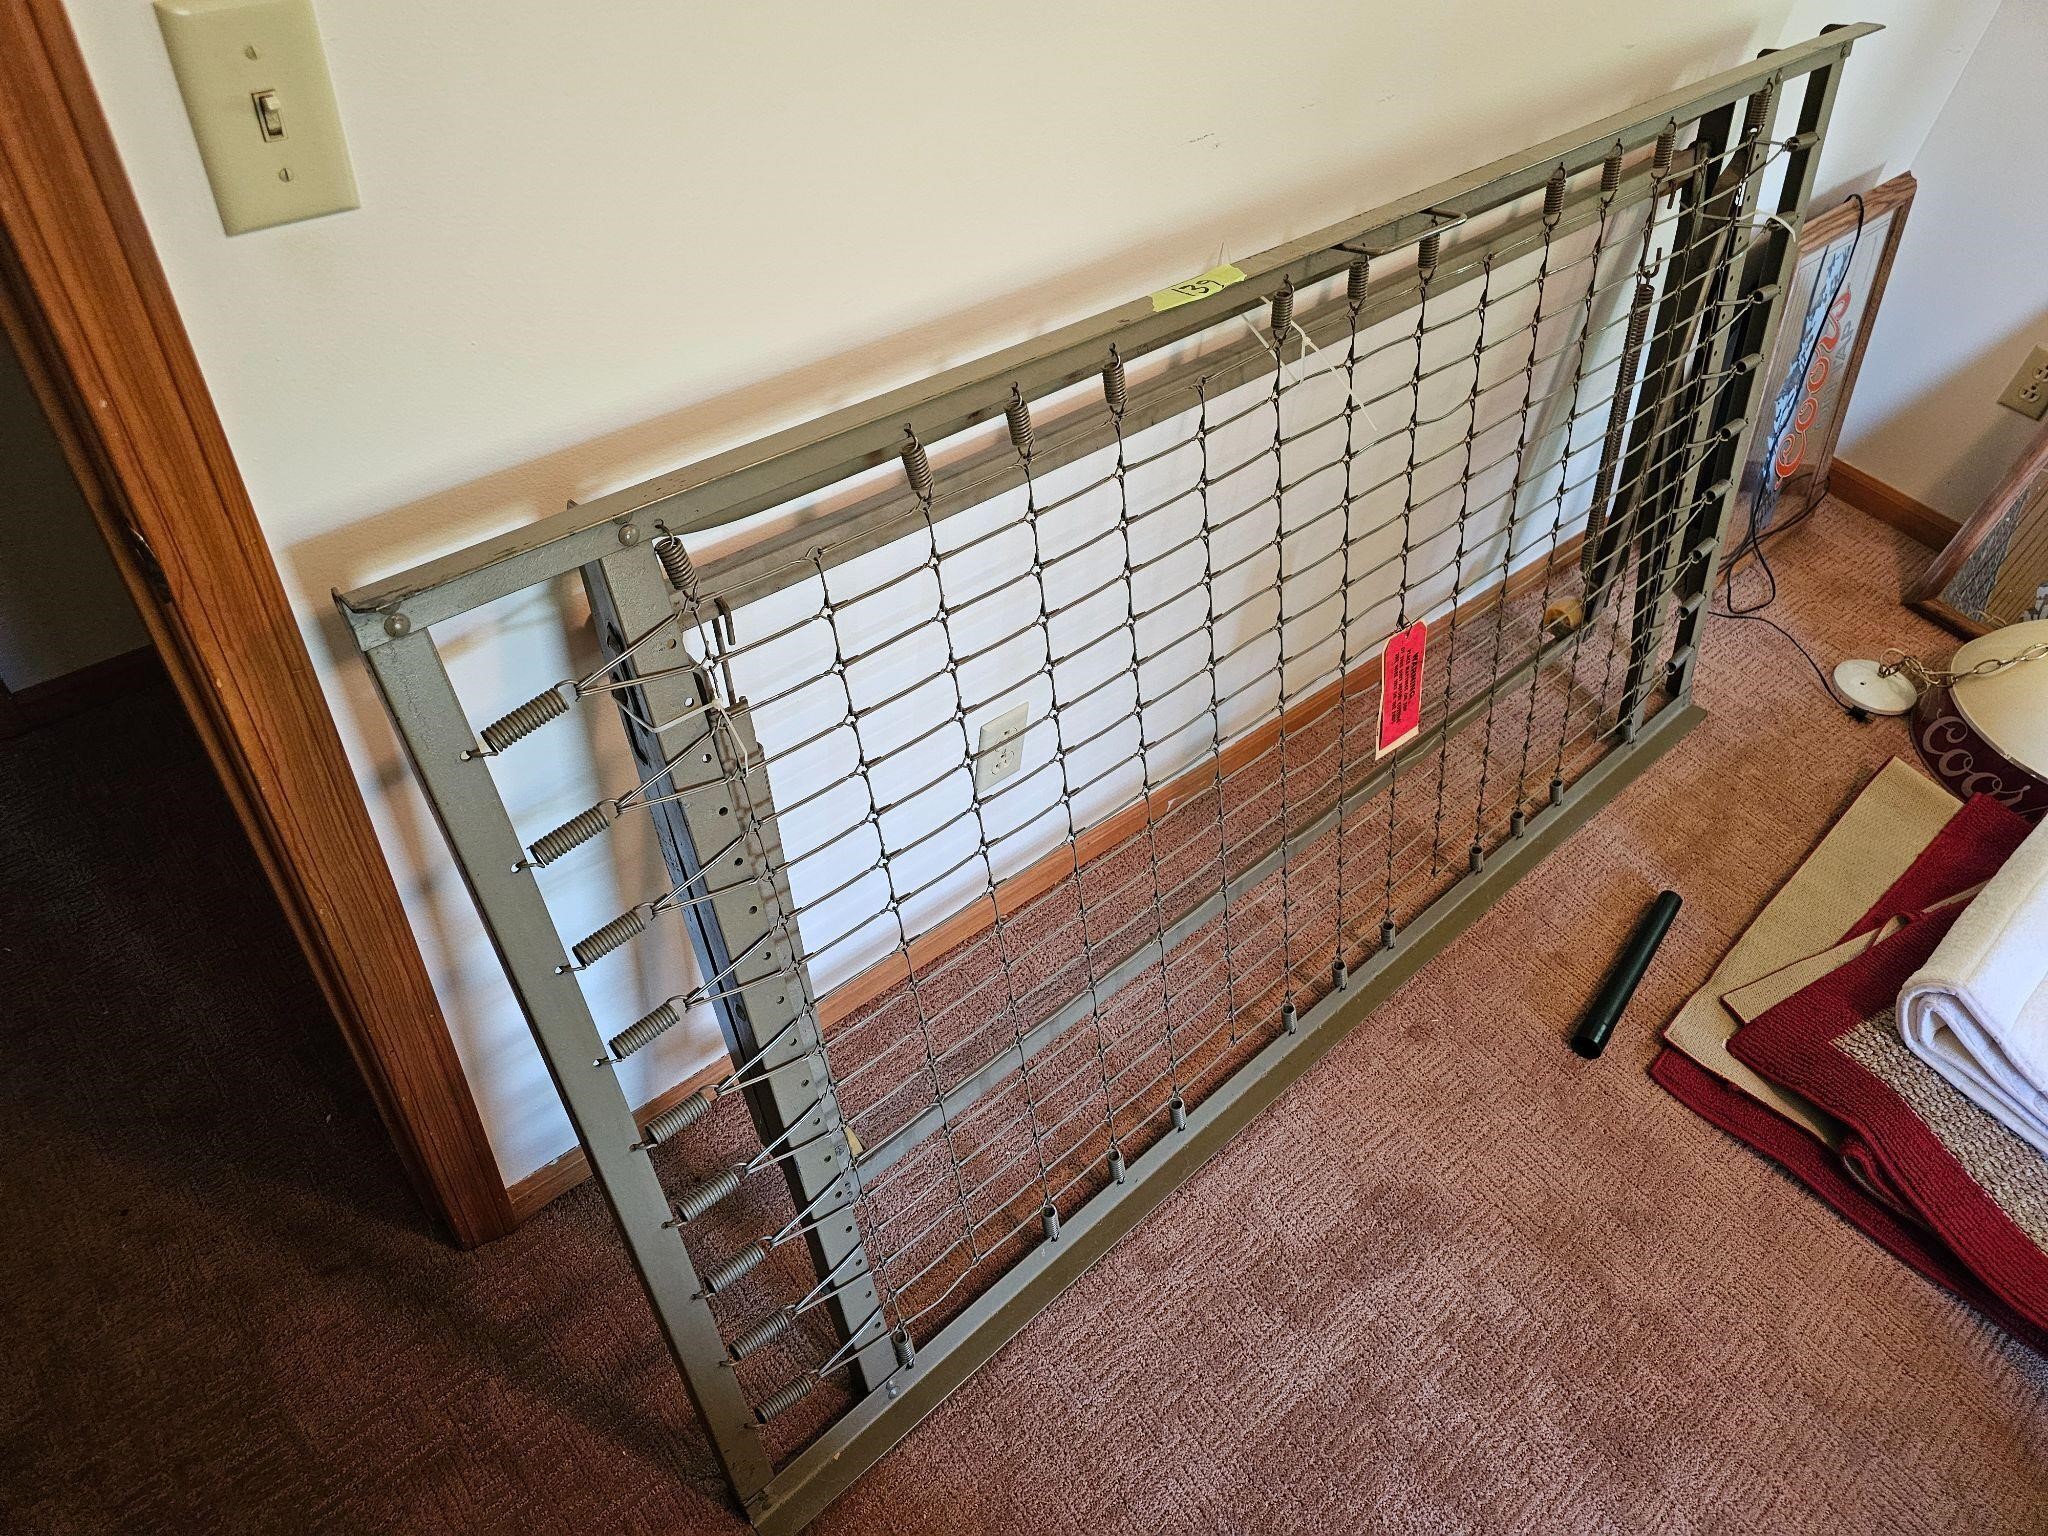 Twin size spring bed frame